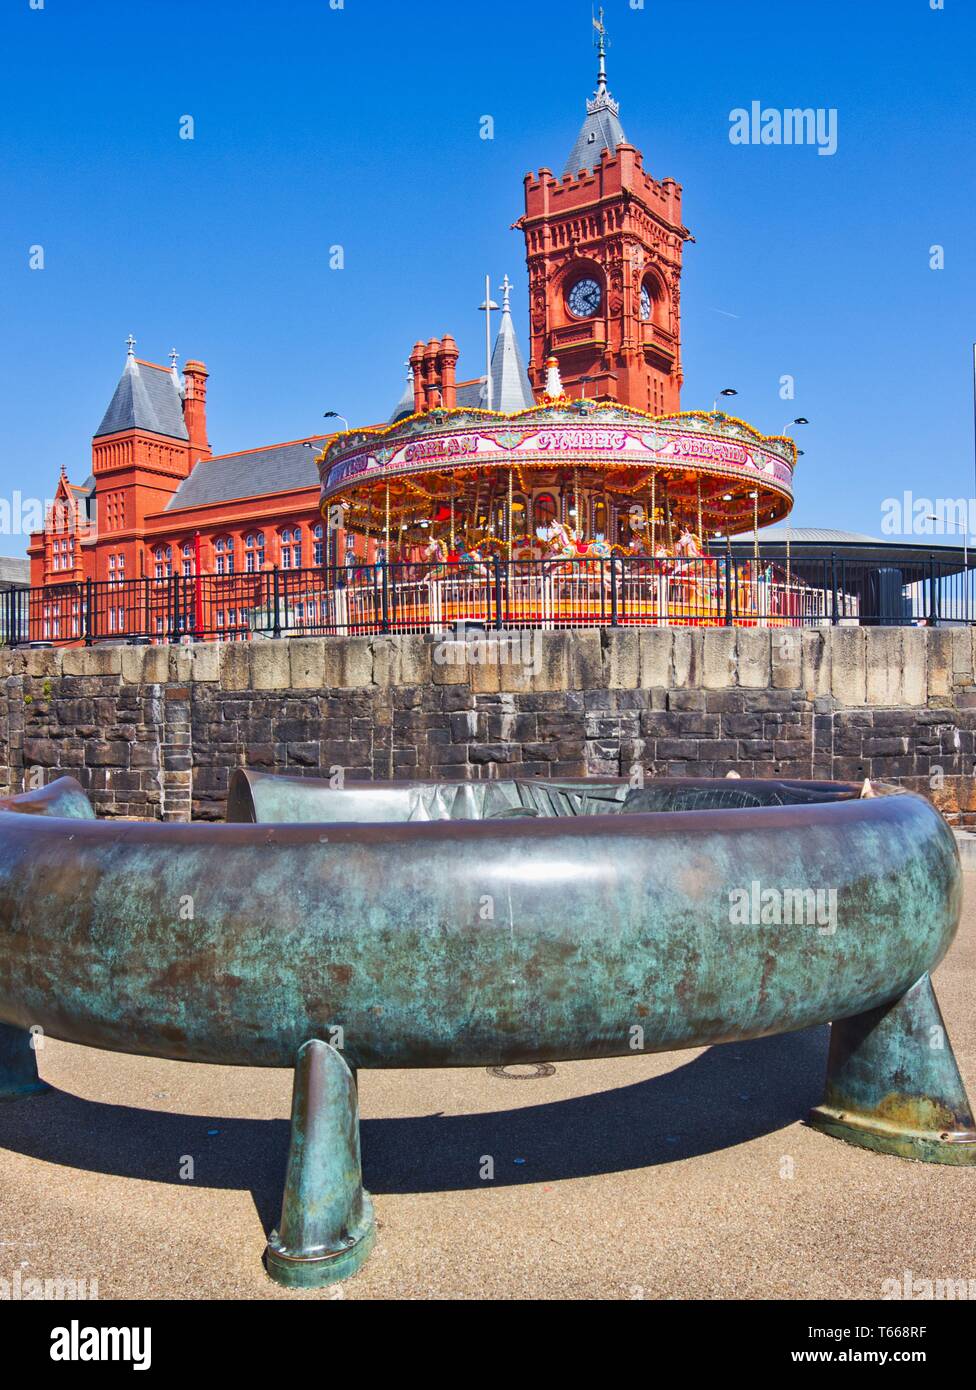 Bronze Celtic Ring sculpture with fairground carousel and the Pierhead building in background, Cardiff Bay, Cardiff, Wales, United Kingdom Stock Photo